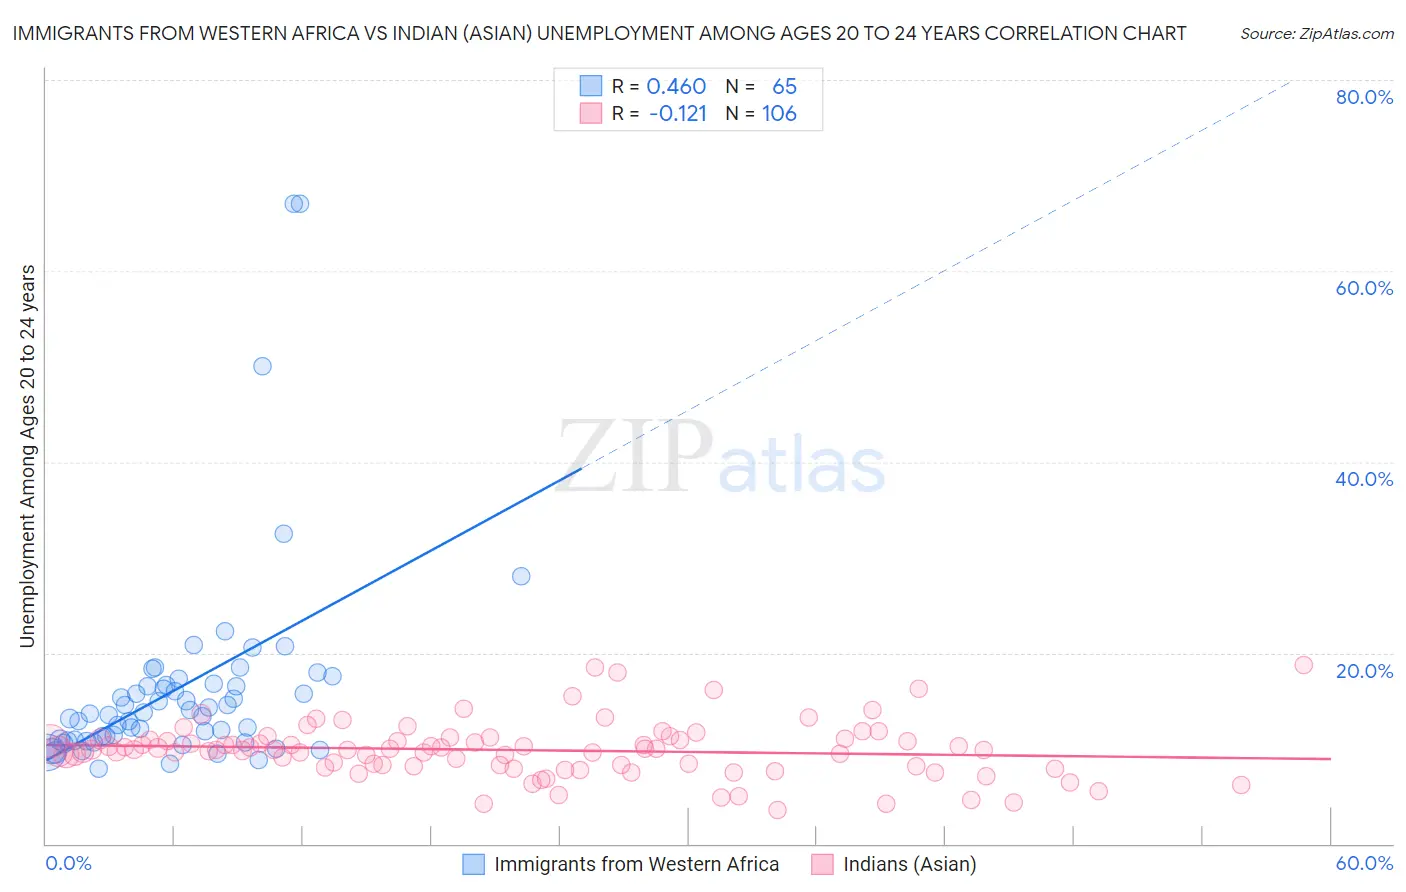 Immigrants from Western Africa vs Indian (Asian) Unemployment Among Ages 20 to 24 years